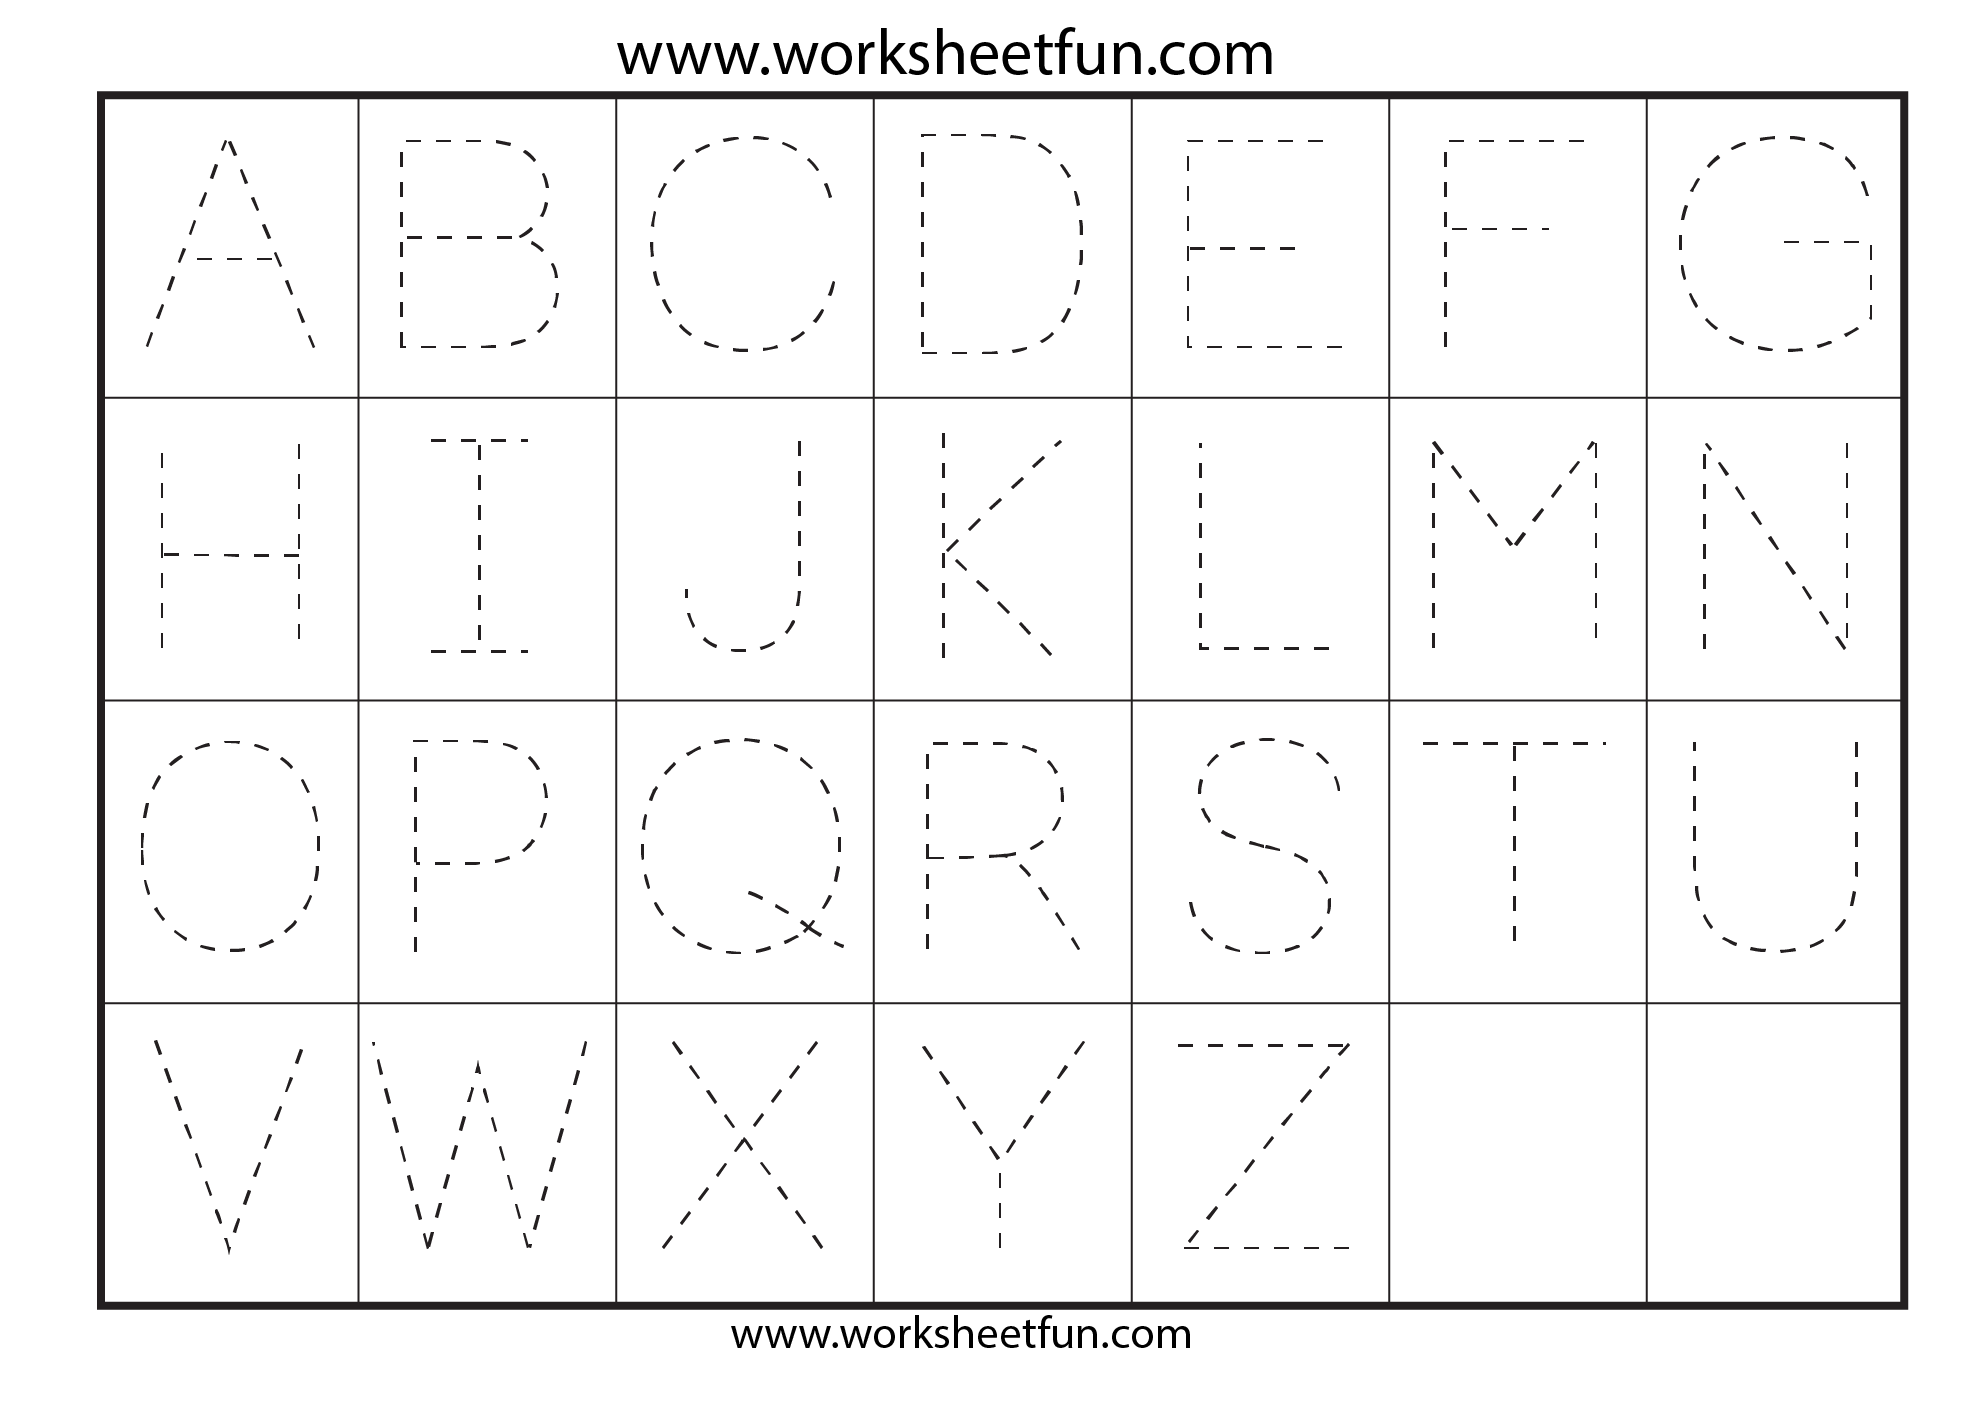 Incredible Letter Tracing Worksheets Image Ideas